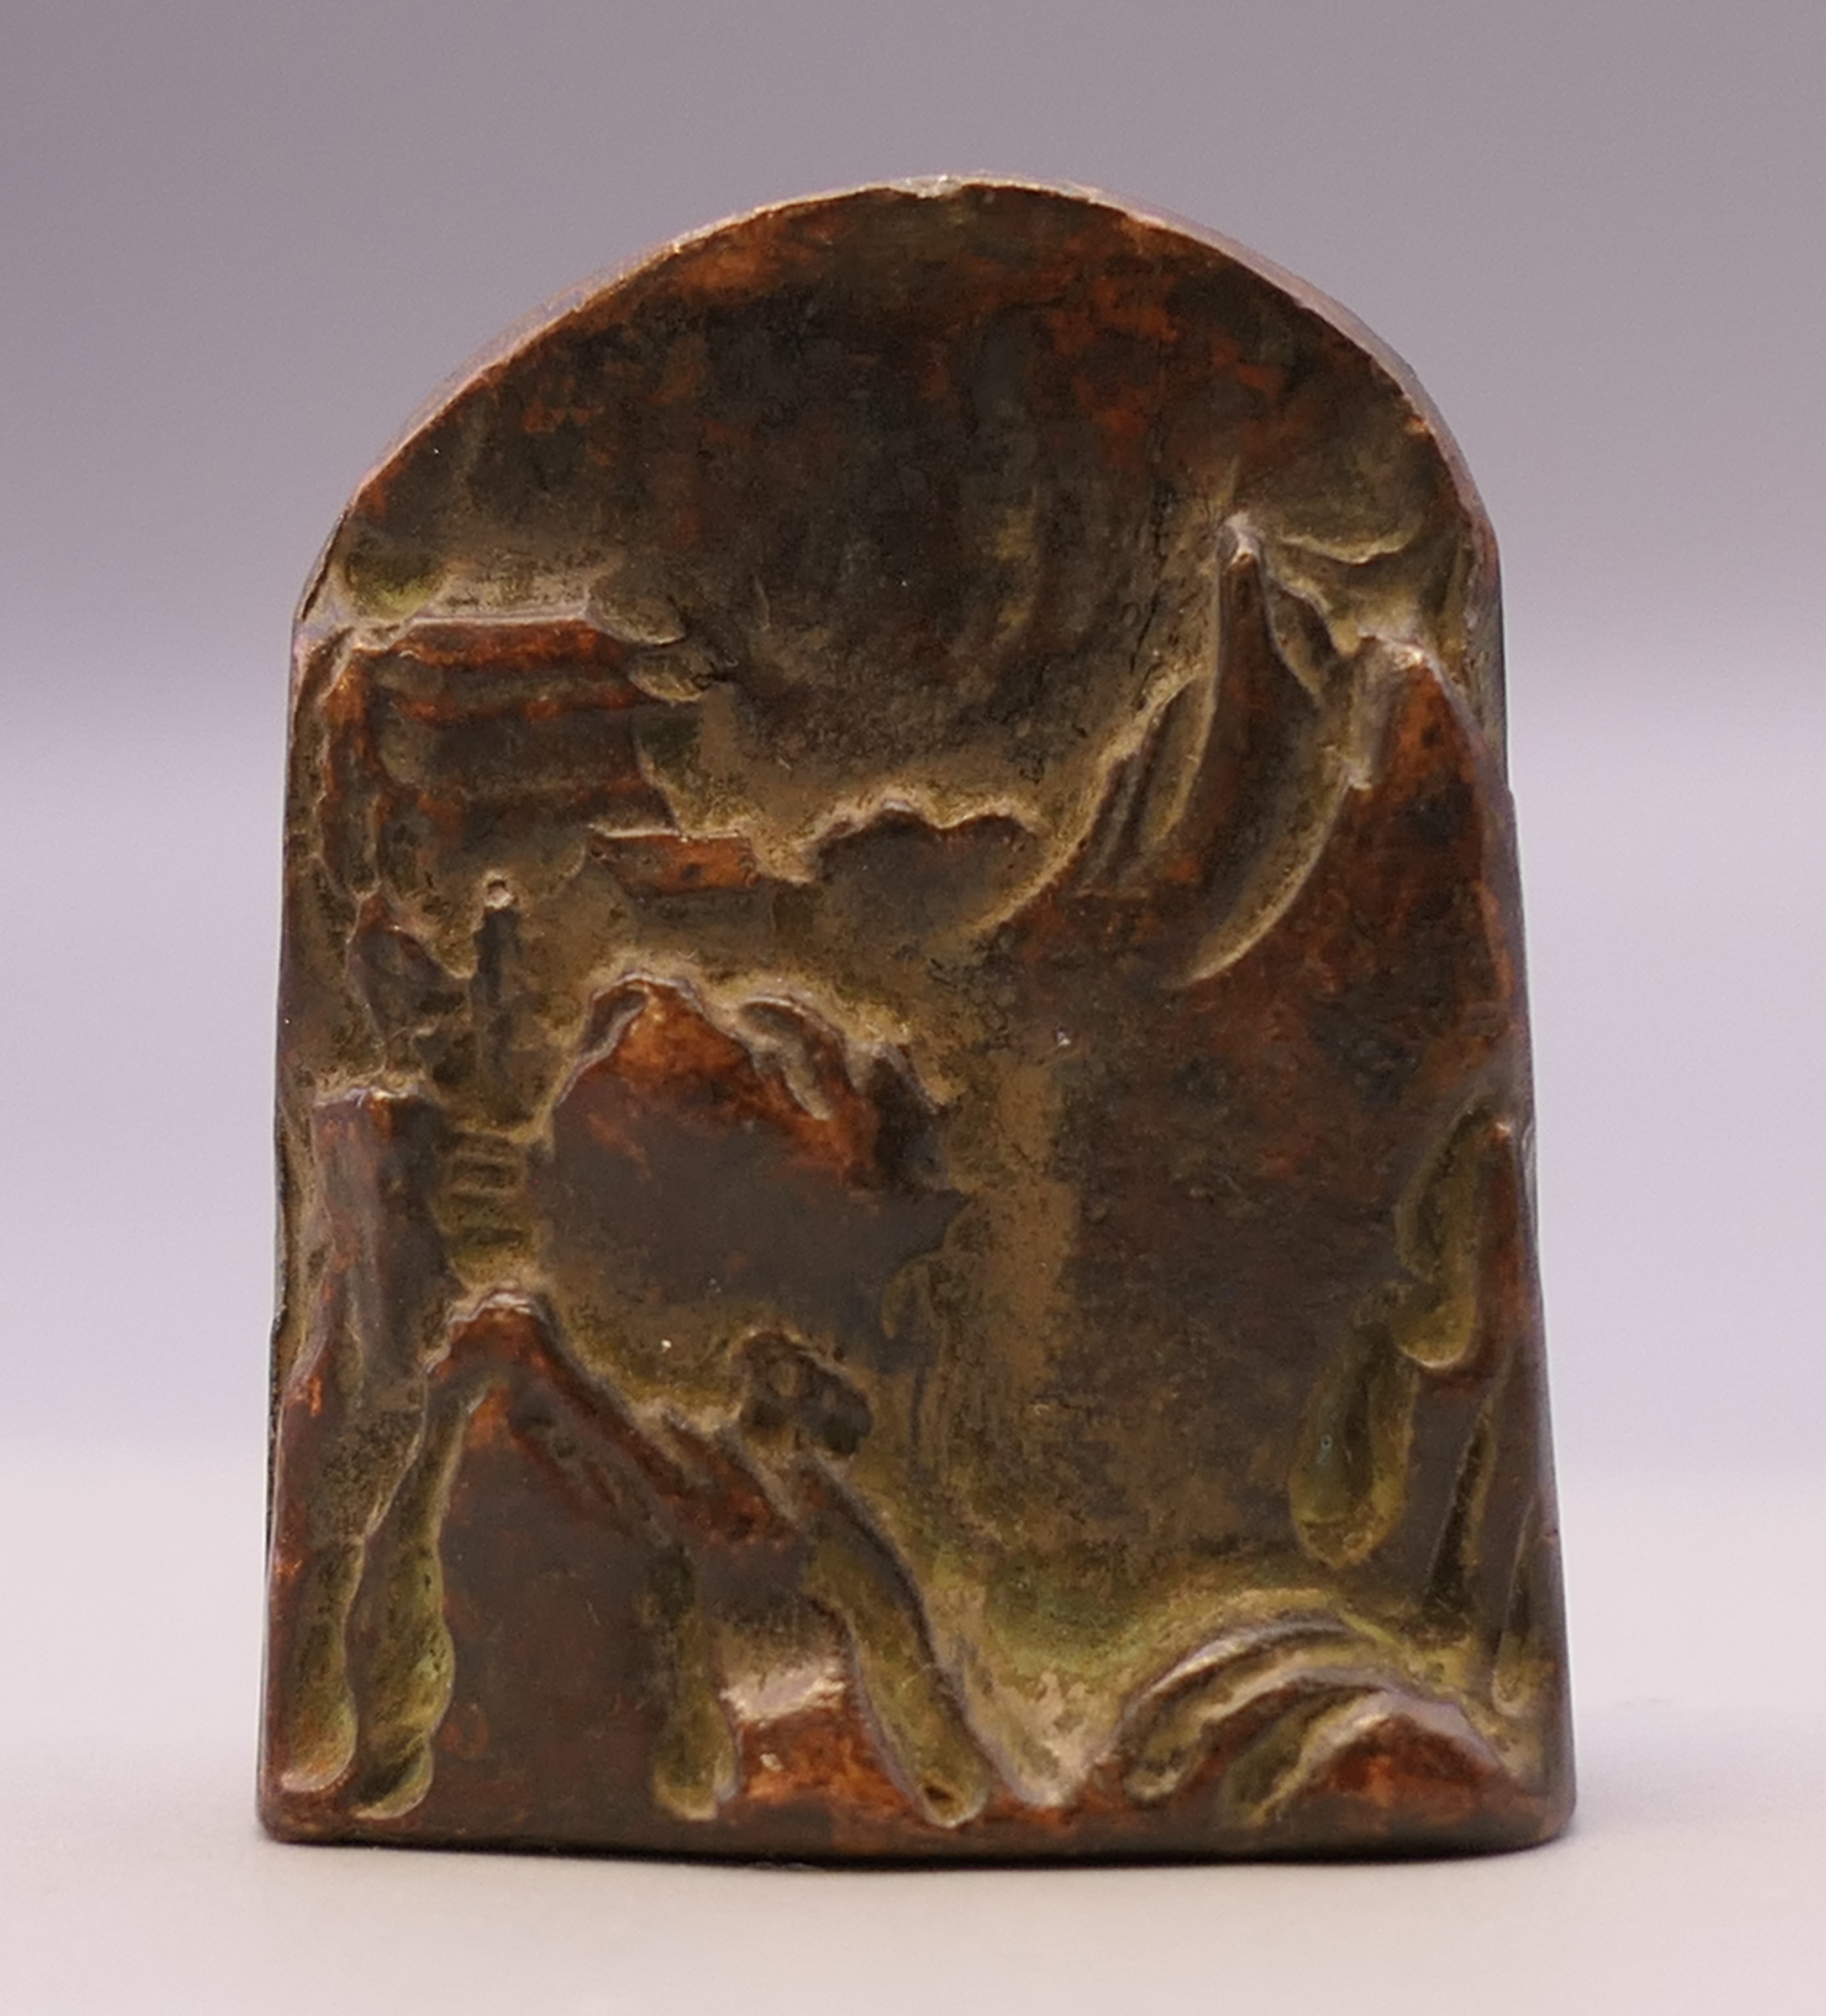 A bronze seal decorated with mountains. 4 cm high. - Image 2 of 5